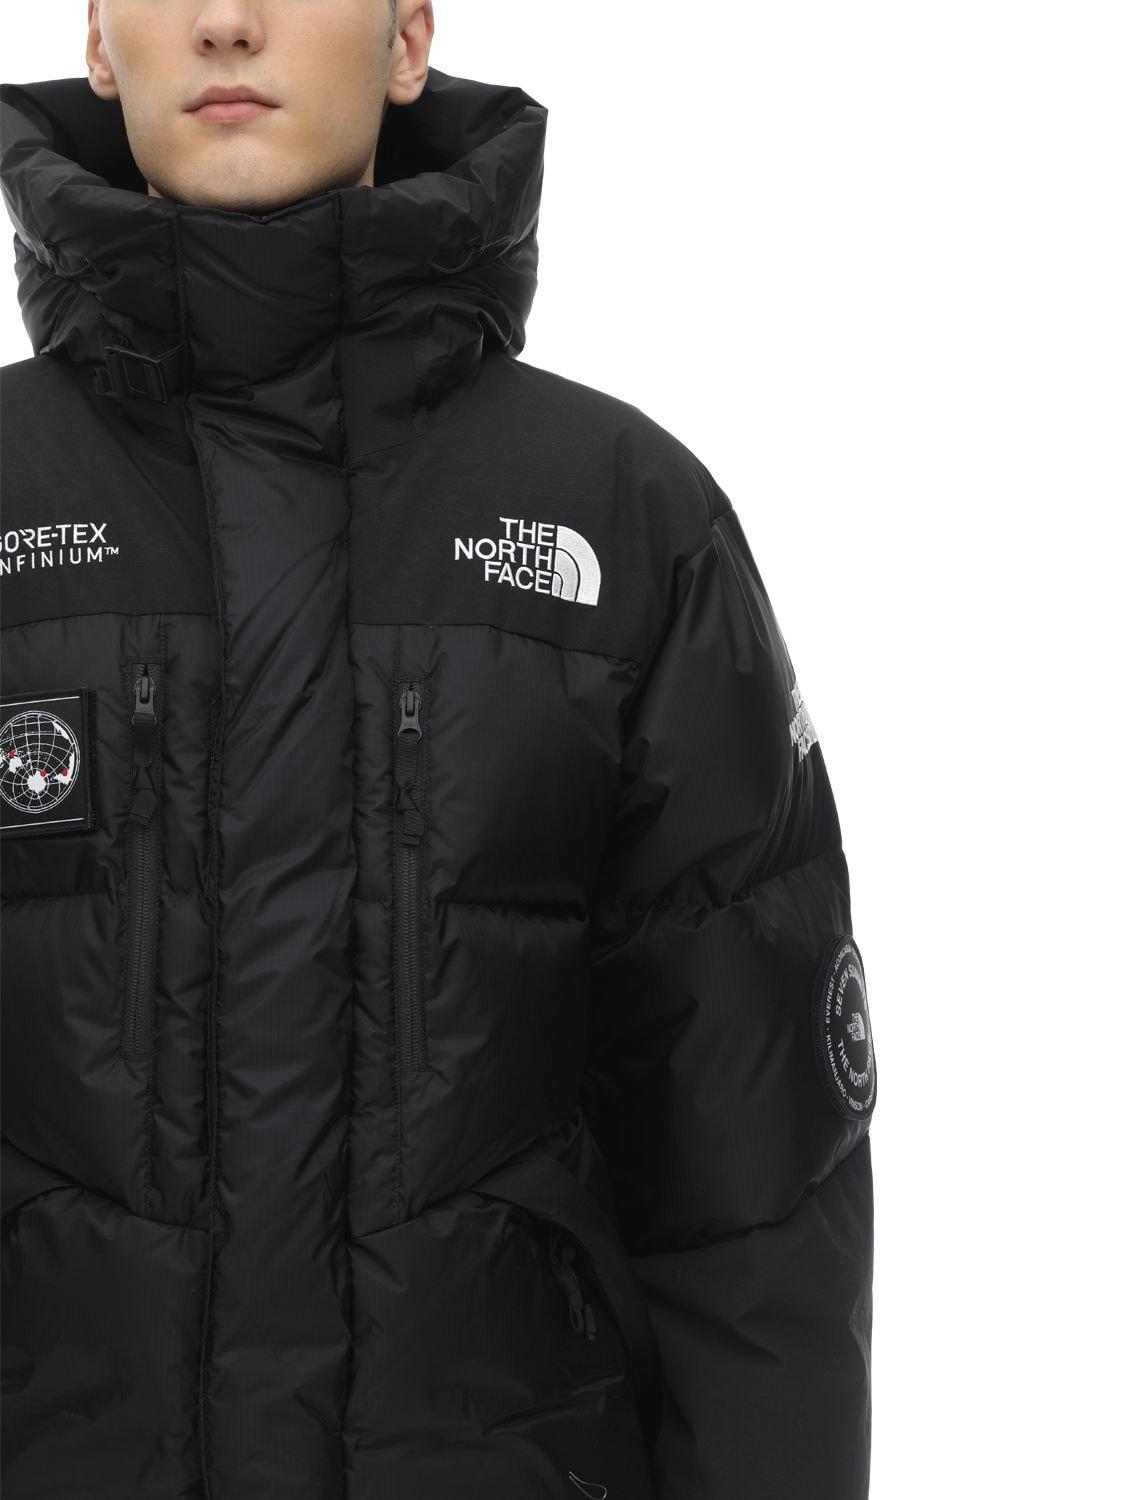 The North Face 7 Se Himalayan Gtx Down Parka in Black for Men - Lyst